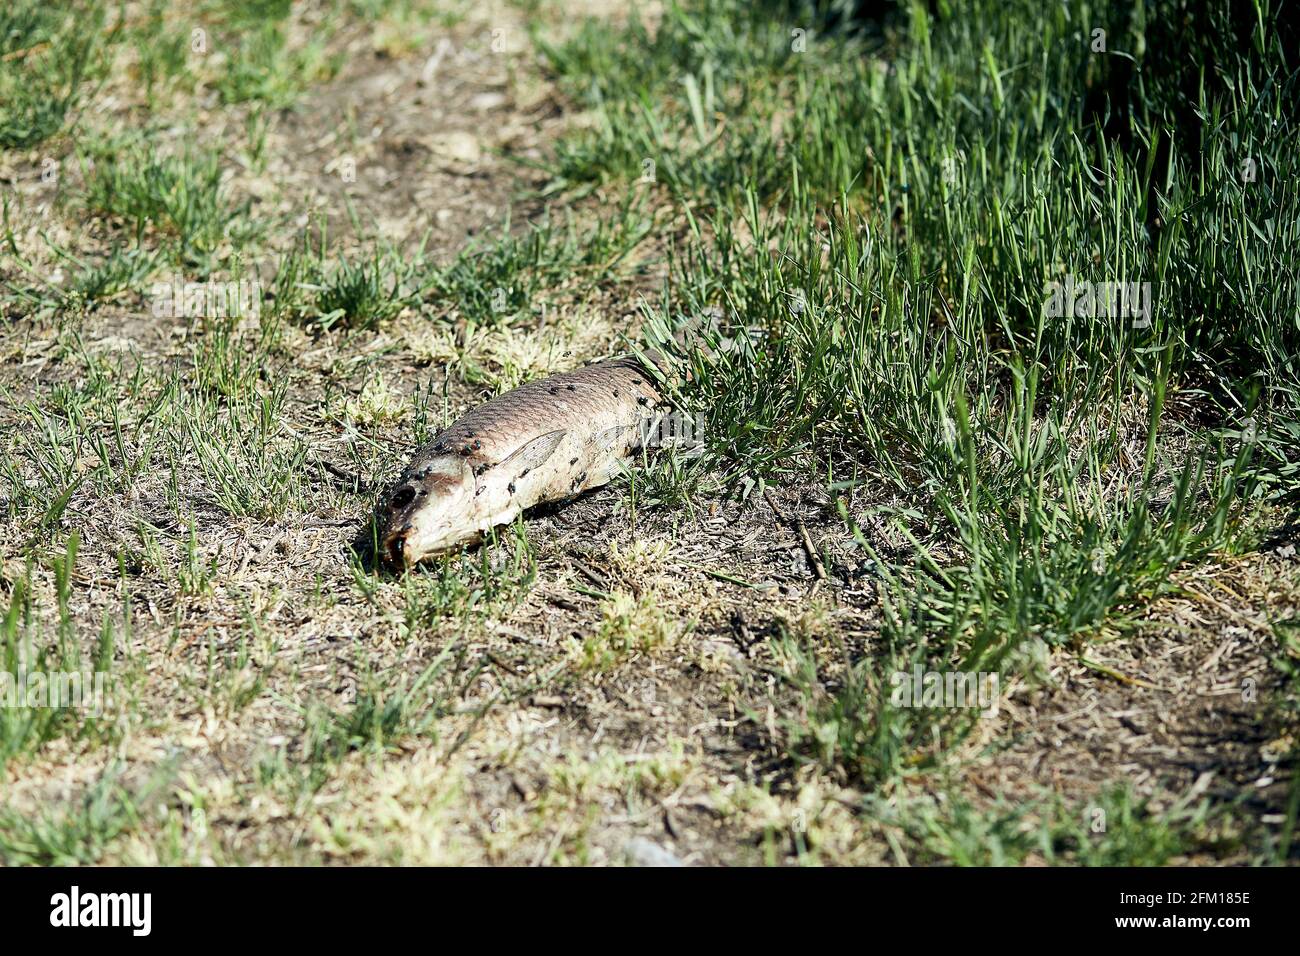 Dead fish on the grass. Environmental pollution problems. Poor ecology concept. Hot summer, climate change. High quality photo Stock Photo